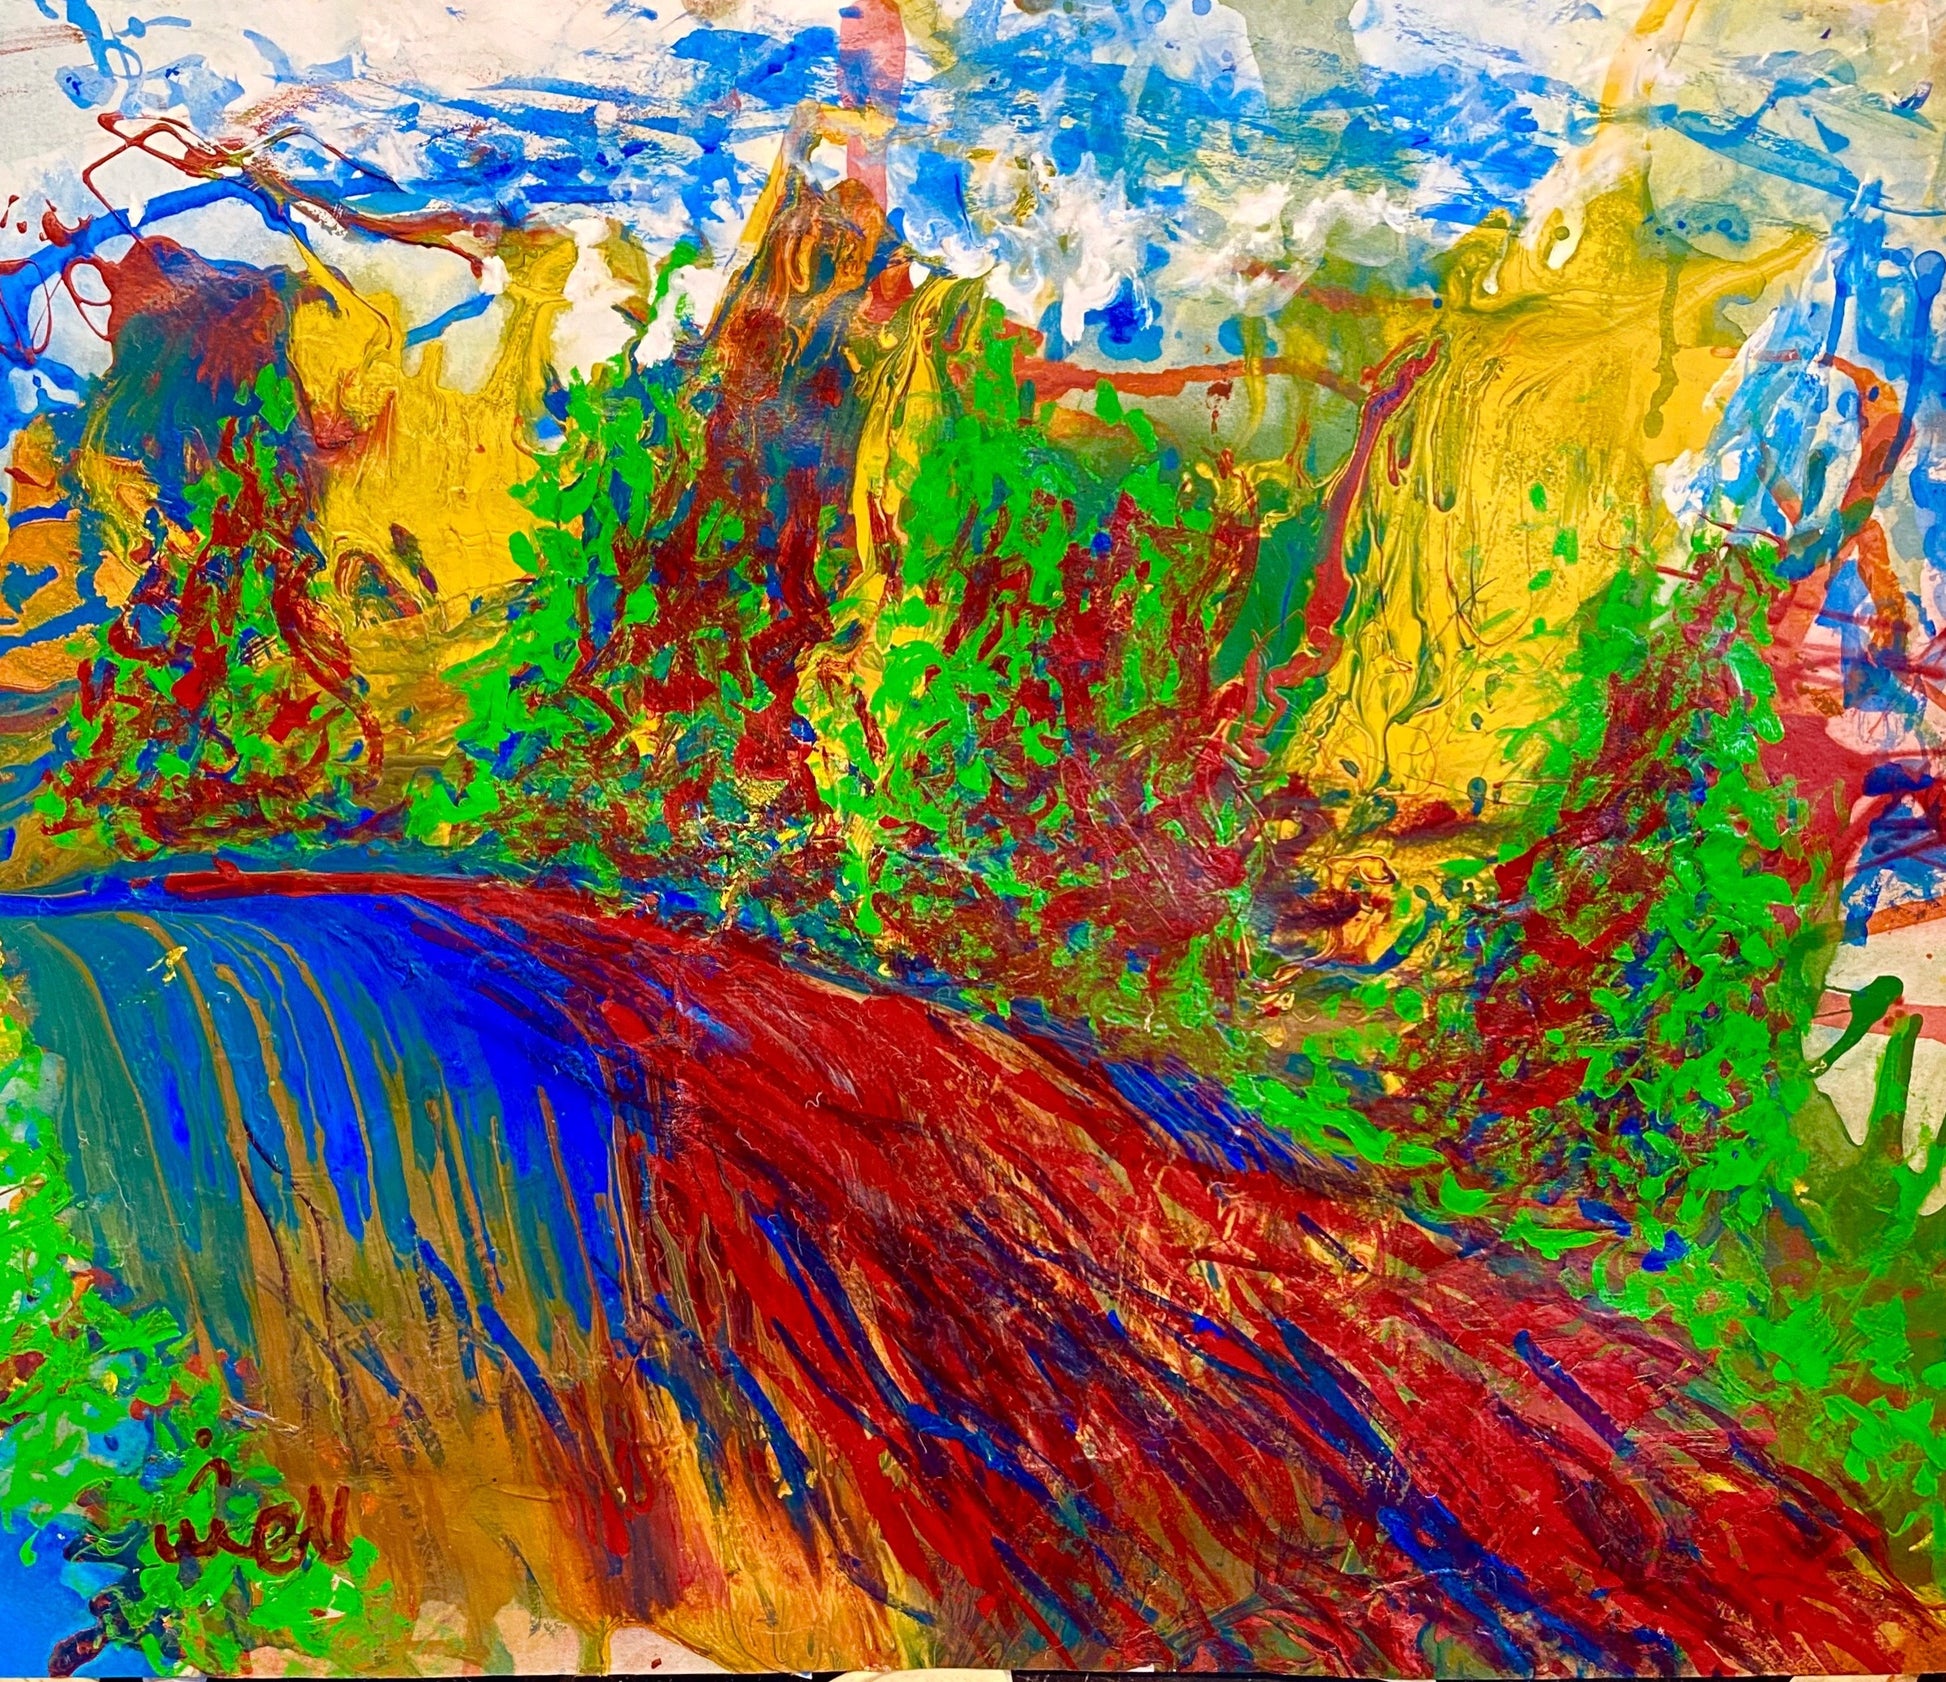 Quietly “Strolling Down the Hill Top”   “Strolling Down The Hill Top” is an Acrylic on Paper be Shahla Rahimi Reynolds.  it is  25.5” H x  20.75”“ W.